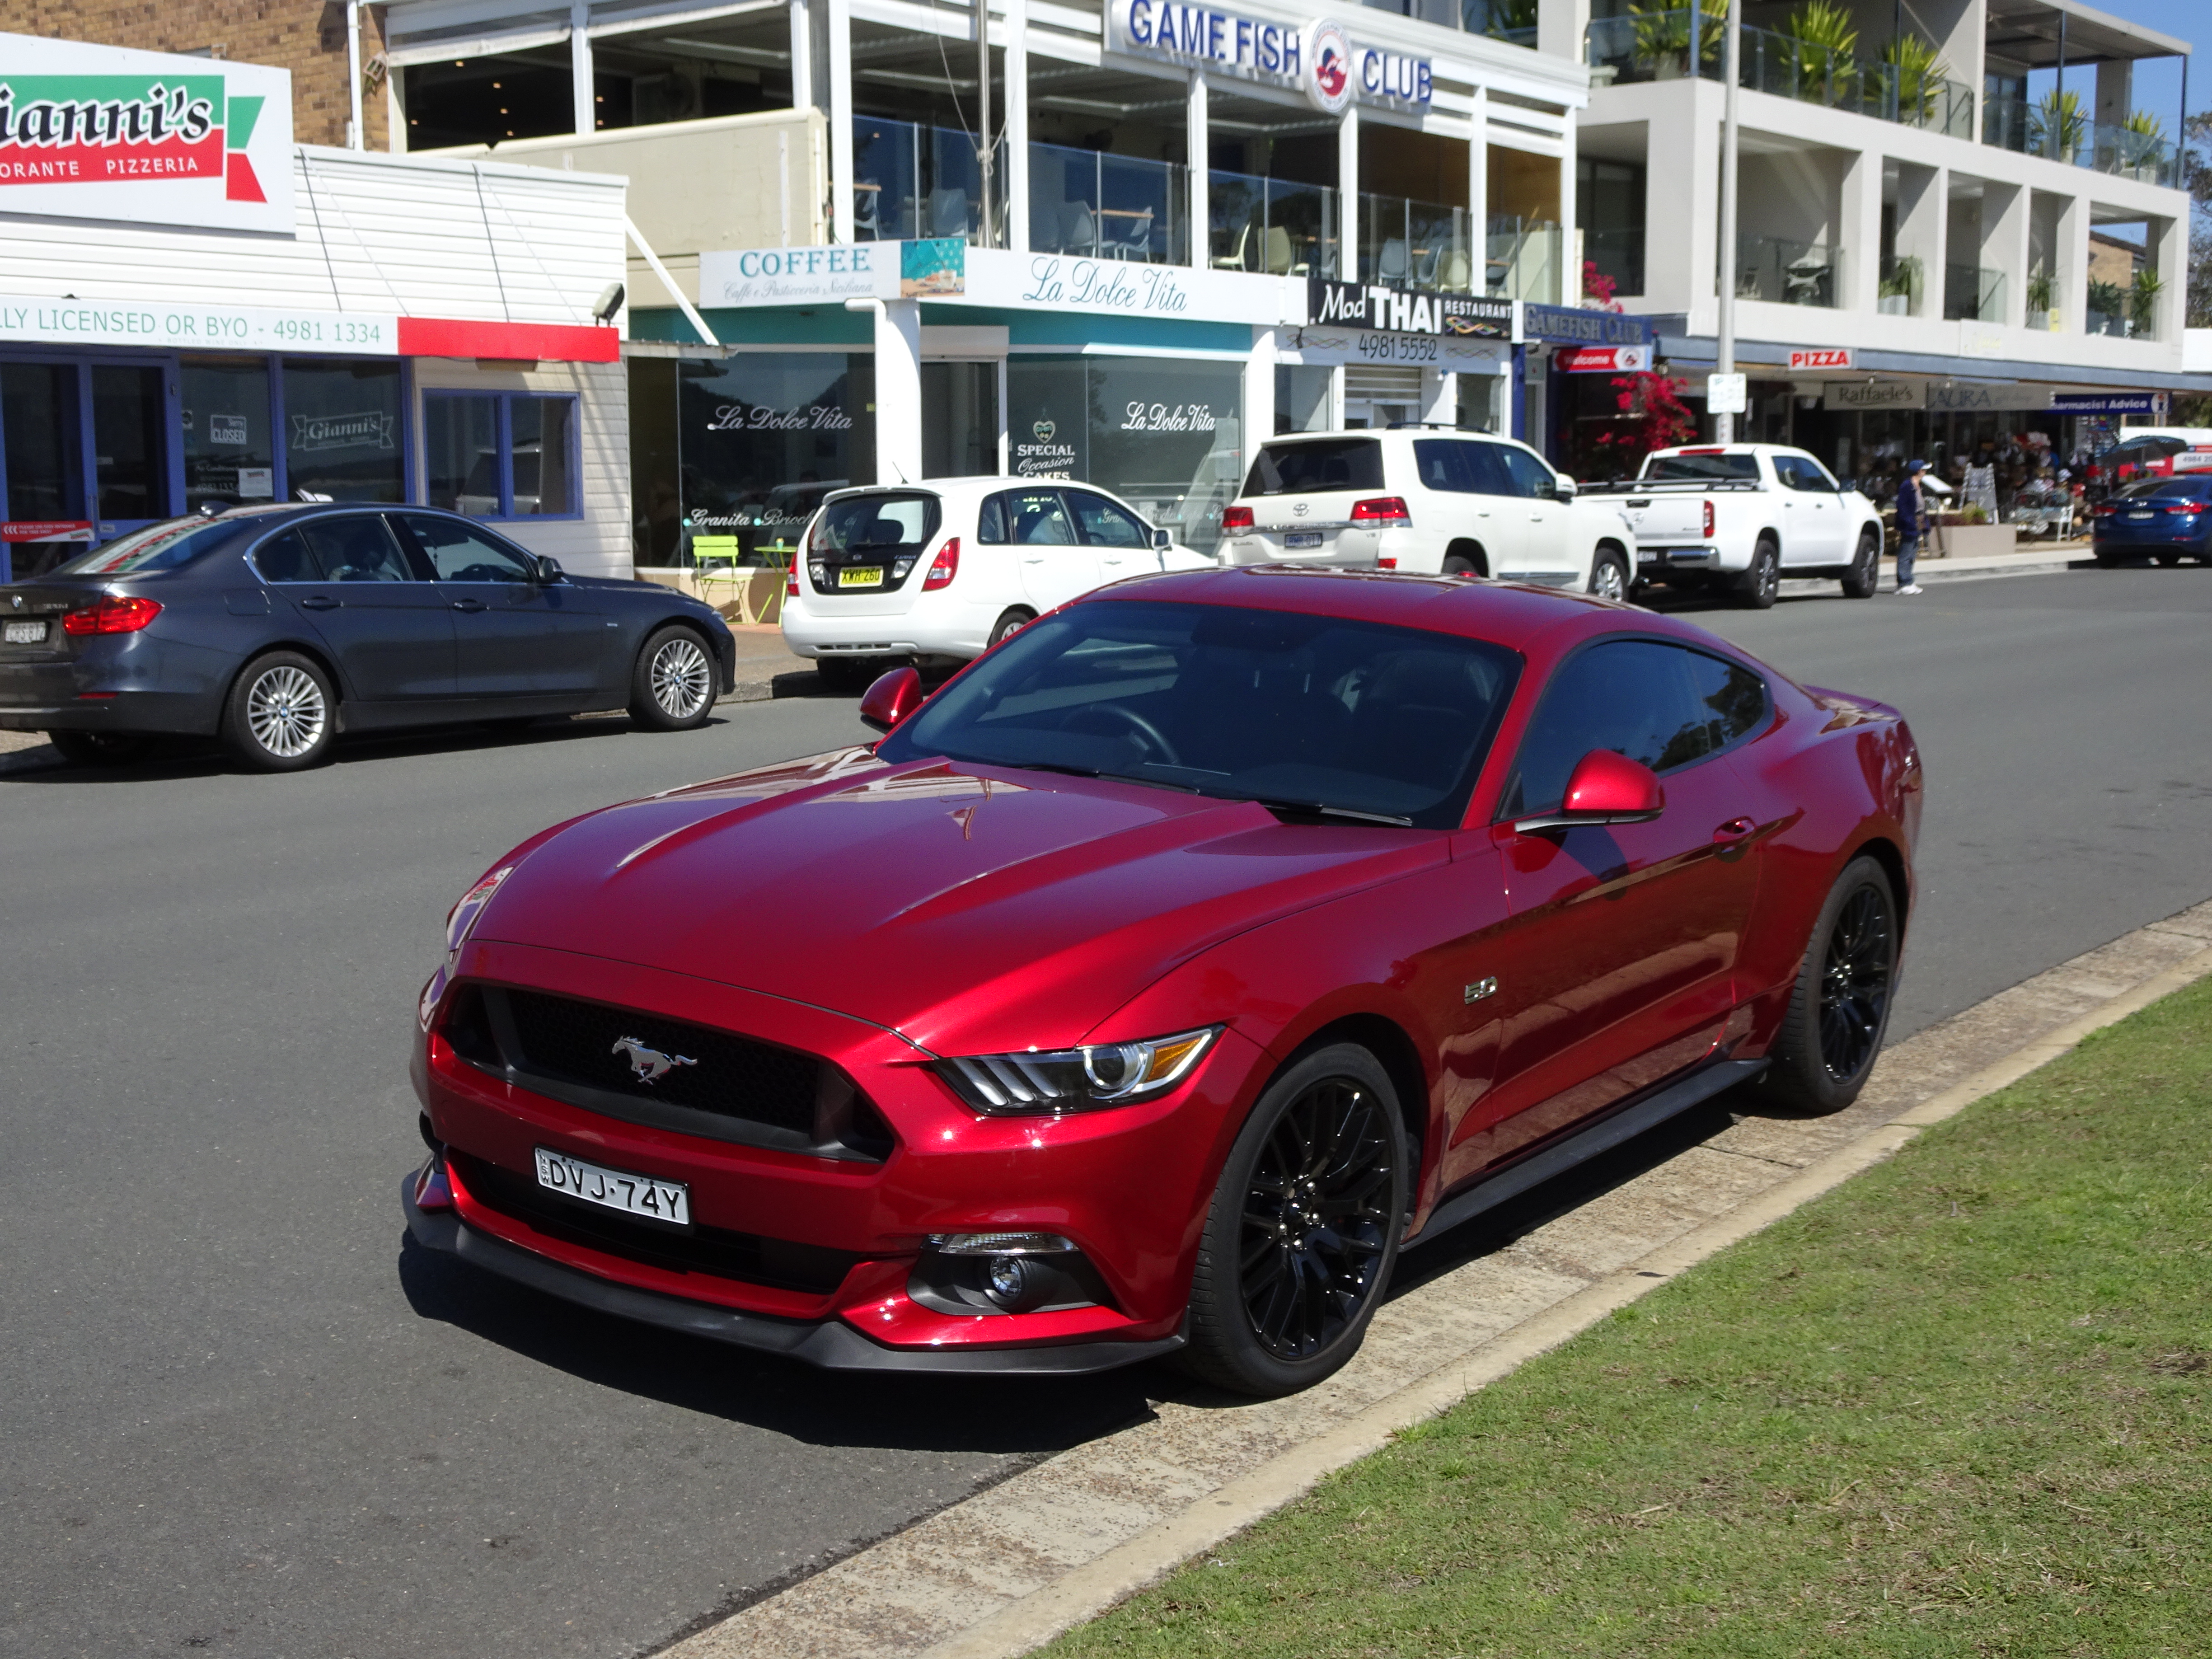 File:2017 Ford Mustang (44528207214).jpg - Wikimedia Commons